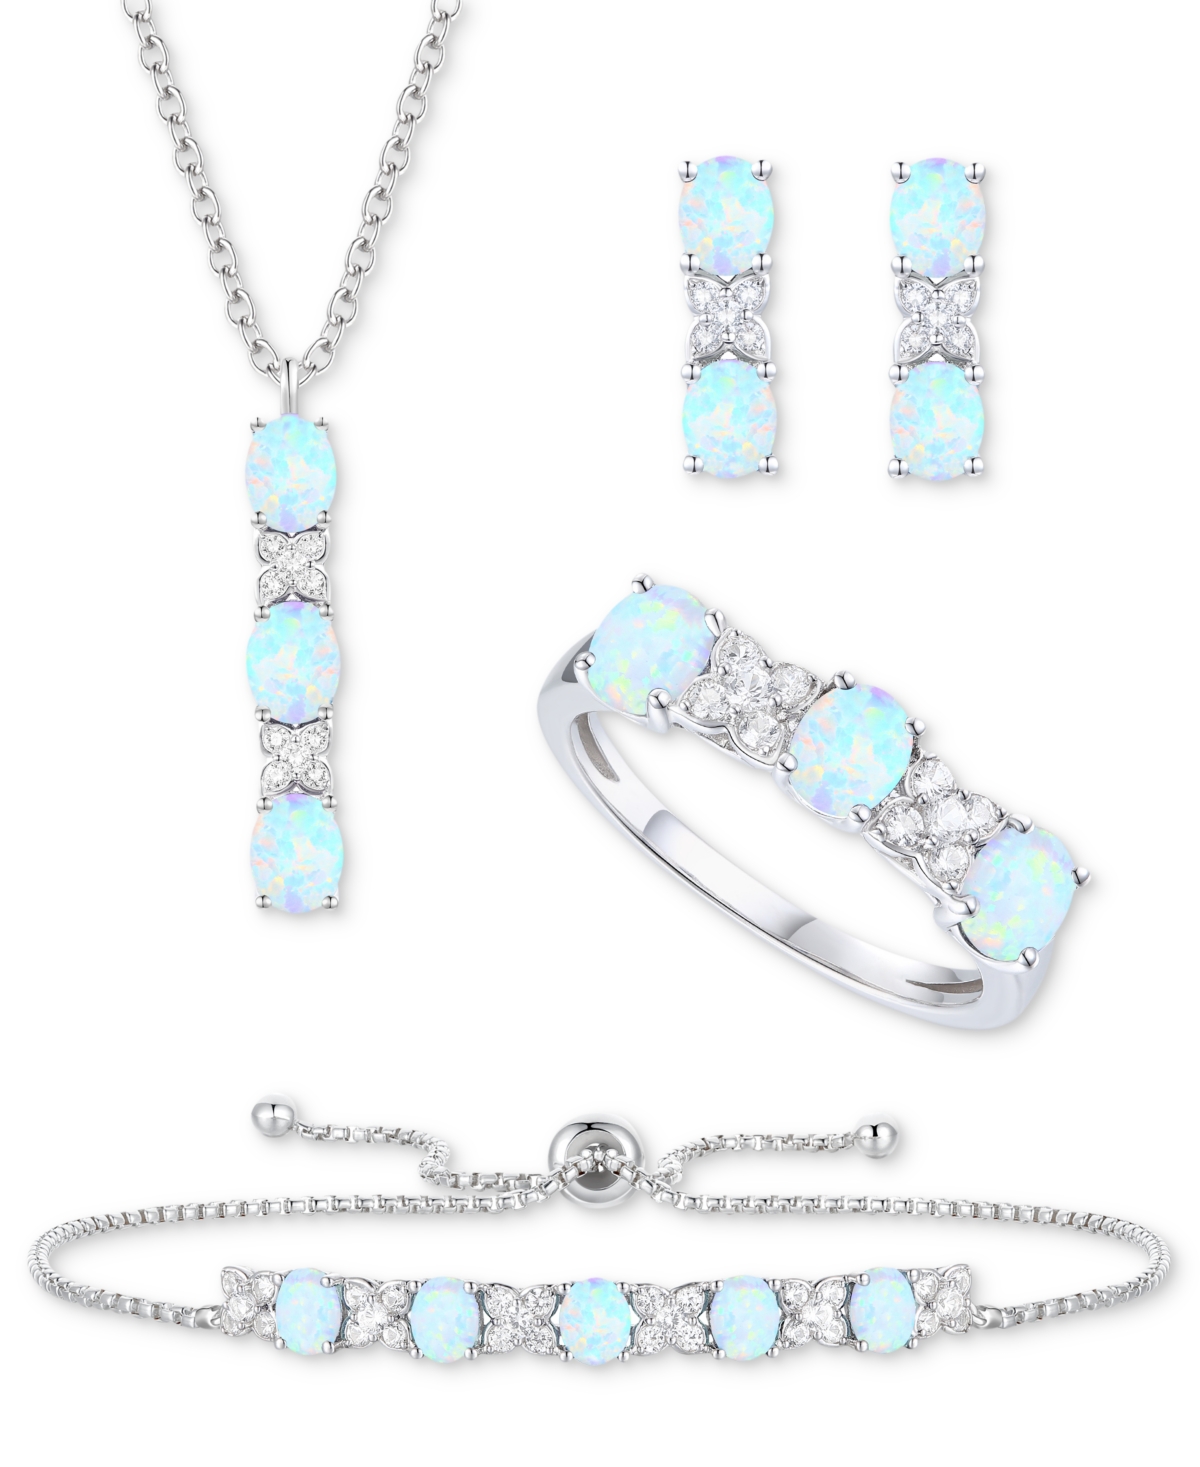 Macy's 5-pc. Set Amethyst (4-5/8 Ct. T.w.) & Lab-grown White Sapphire (3/4 Ct. T.w.) Ring, Pendant Necklace In Opal